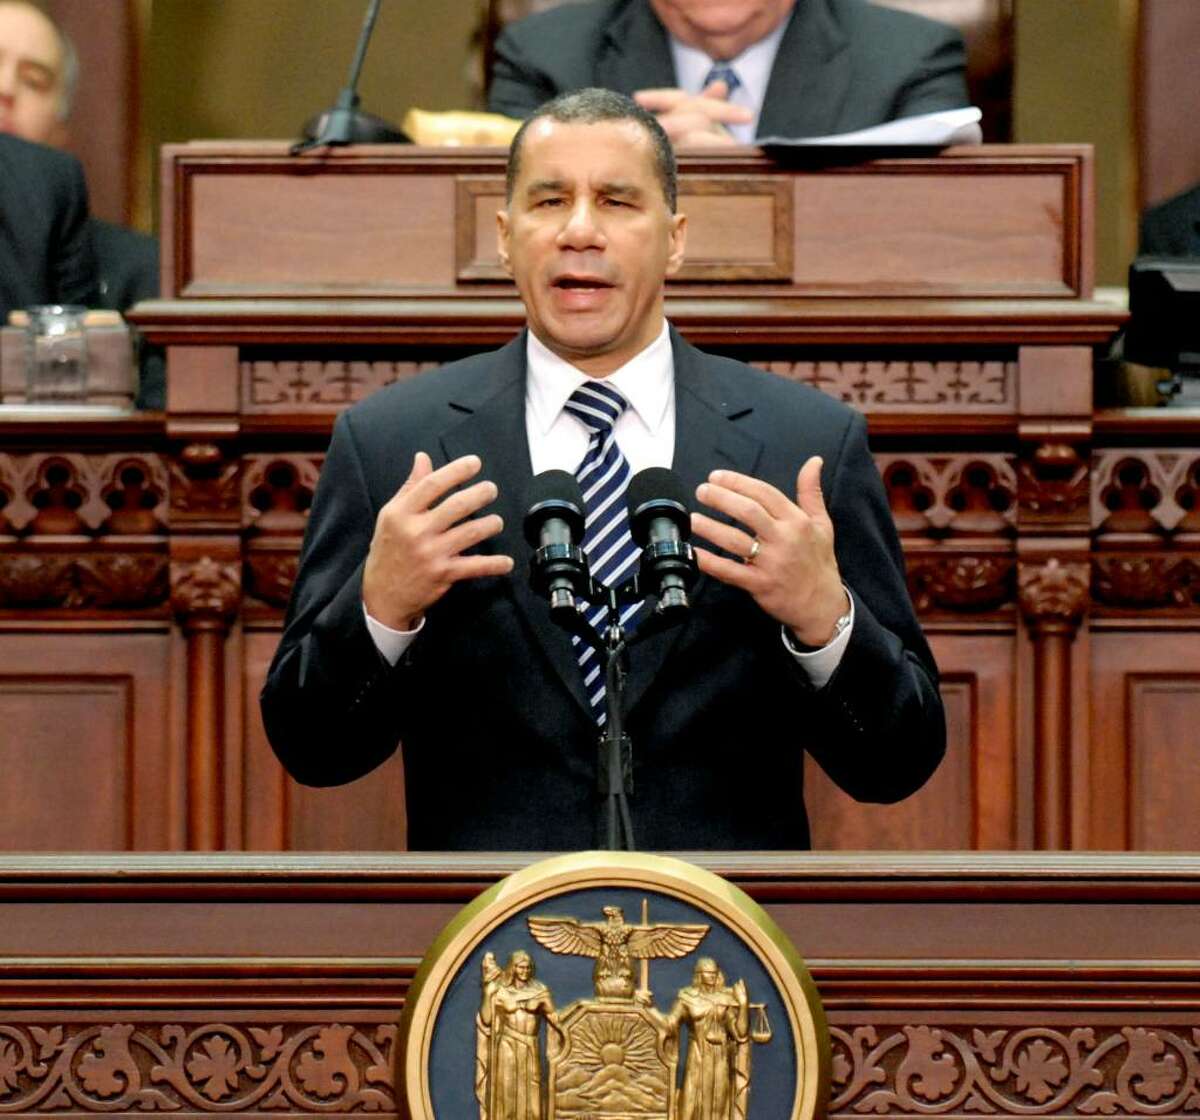 Gov. David Paterson delivers his annual State of the State address in the Assembly chamber Wednesday afternoon, January 6, 2010. (Will Waldron / Times Union)